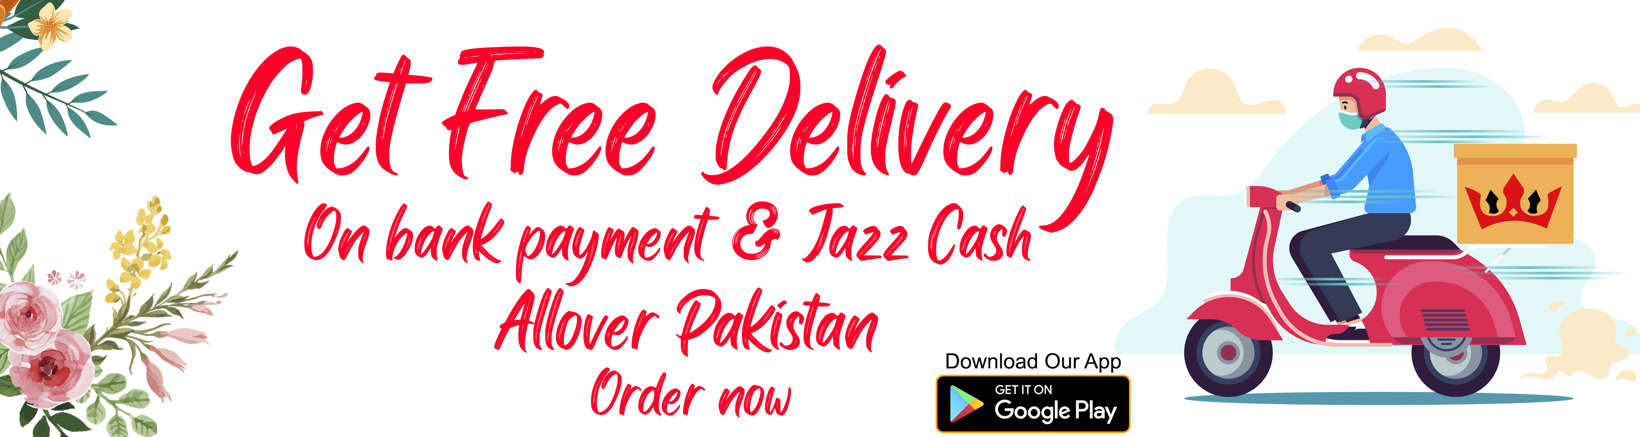 Free Delivery on Advance Payment